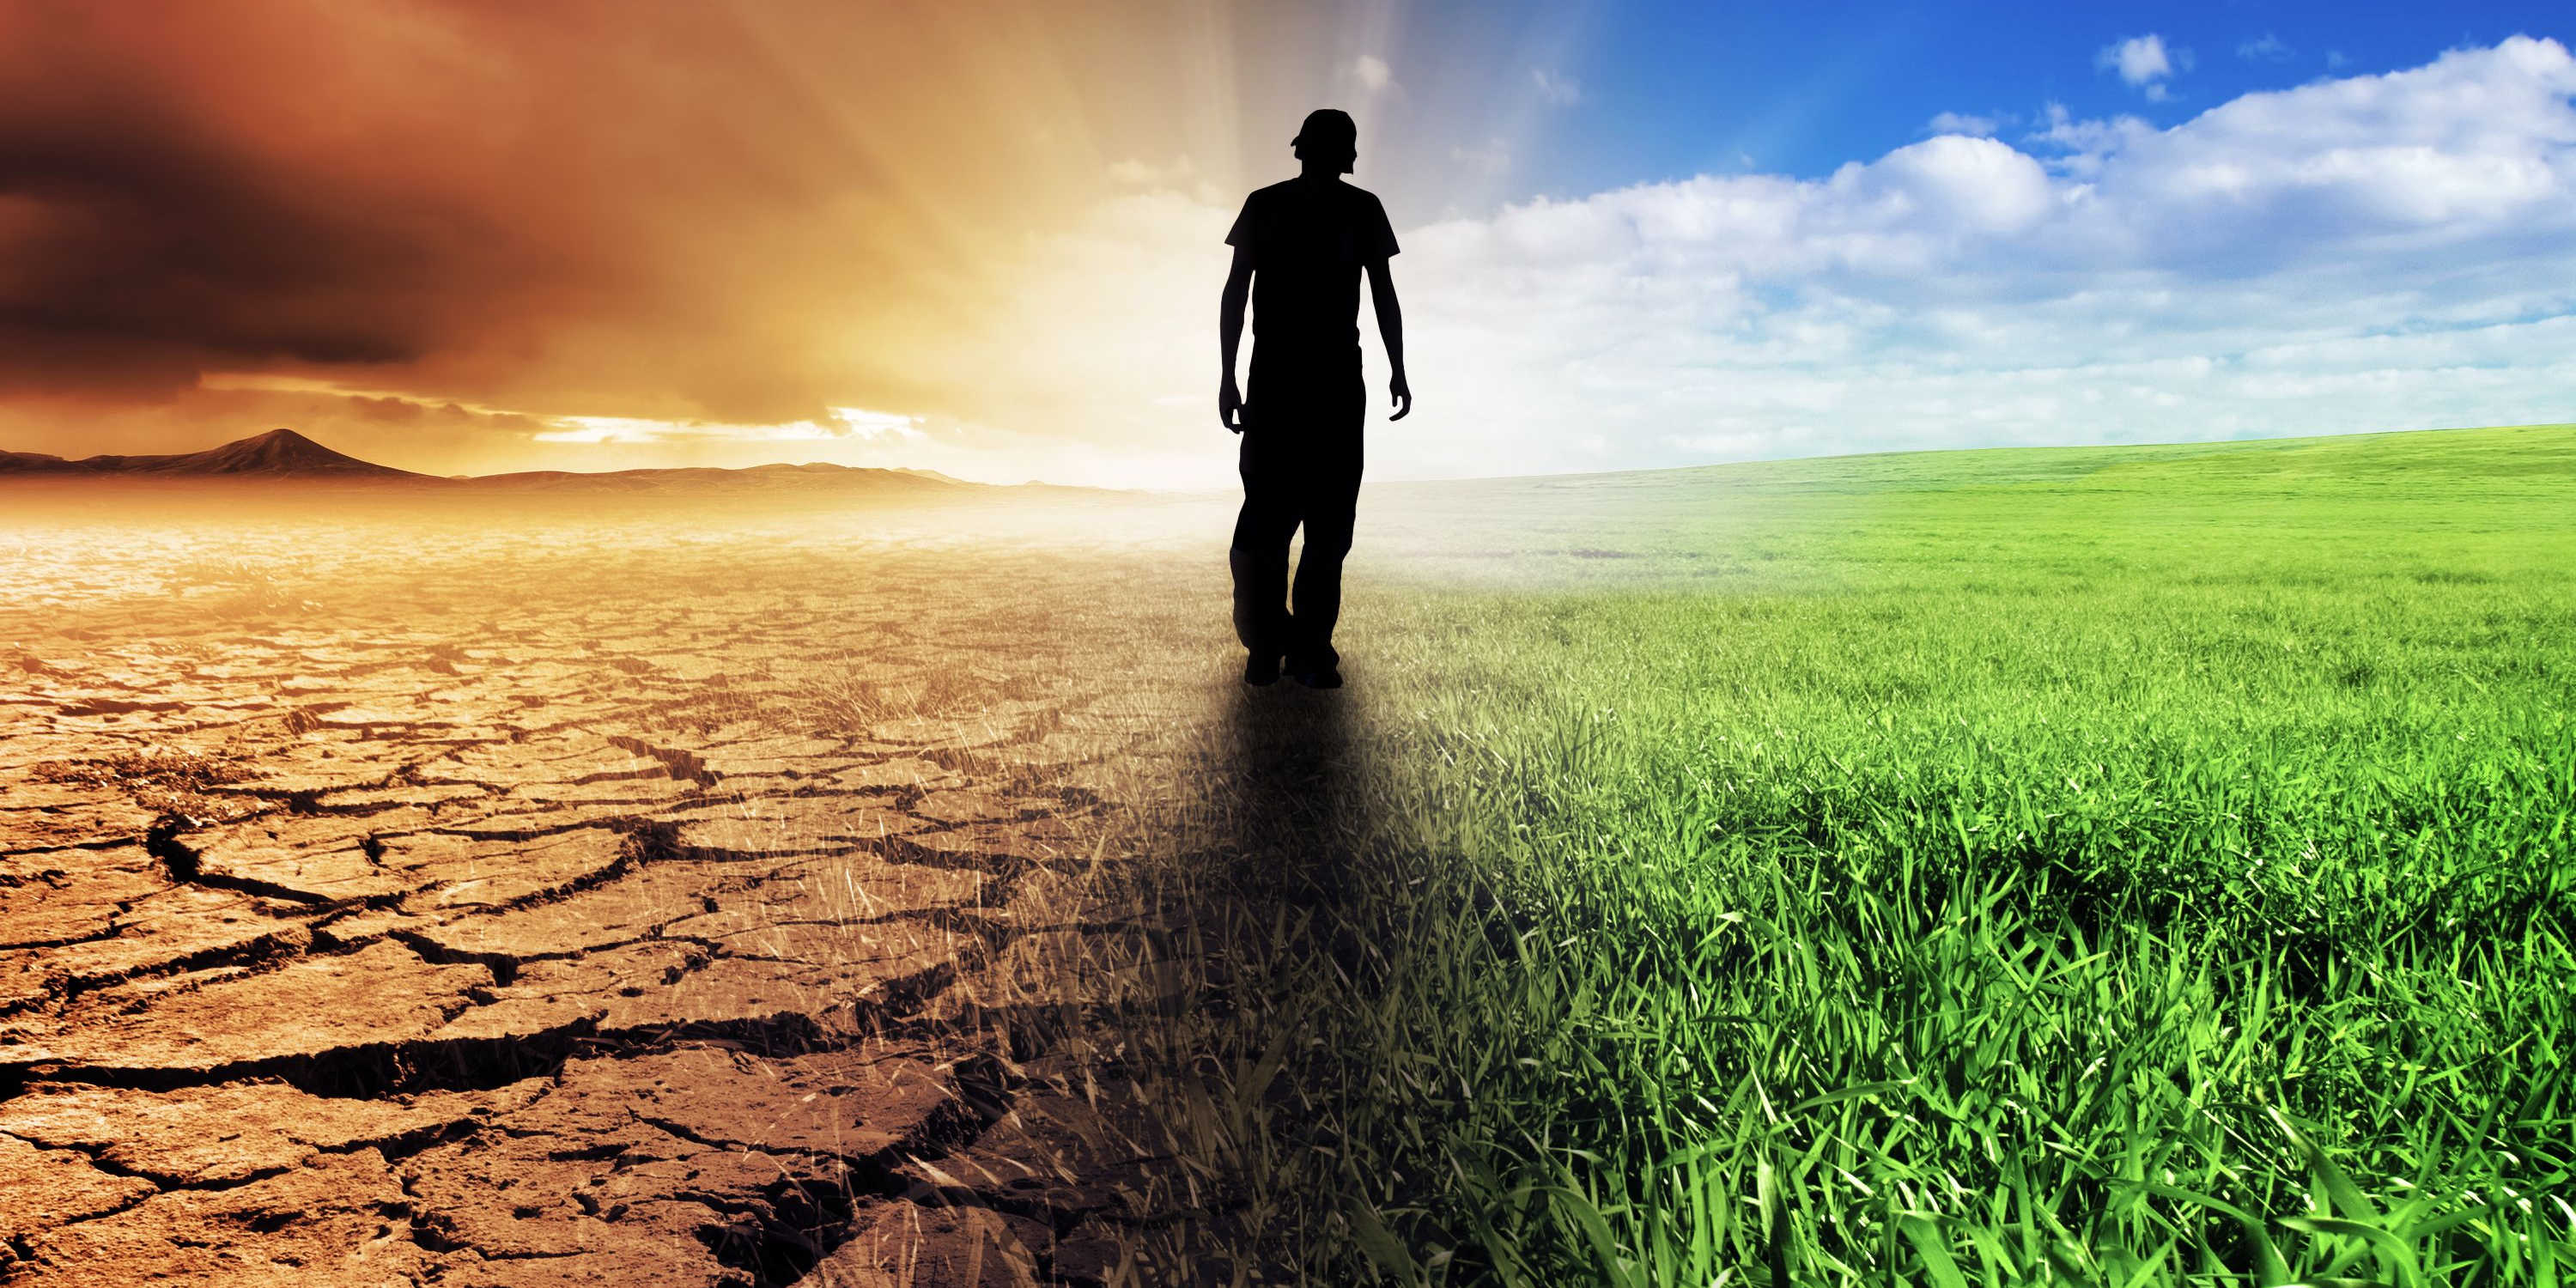 A man walking with desert on one side and green grass on the other